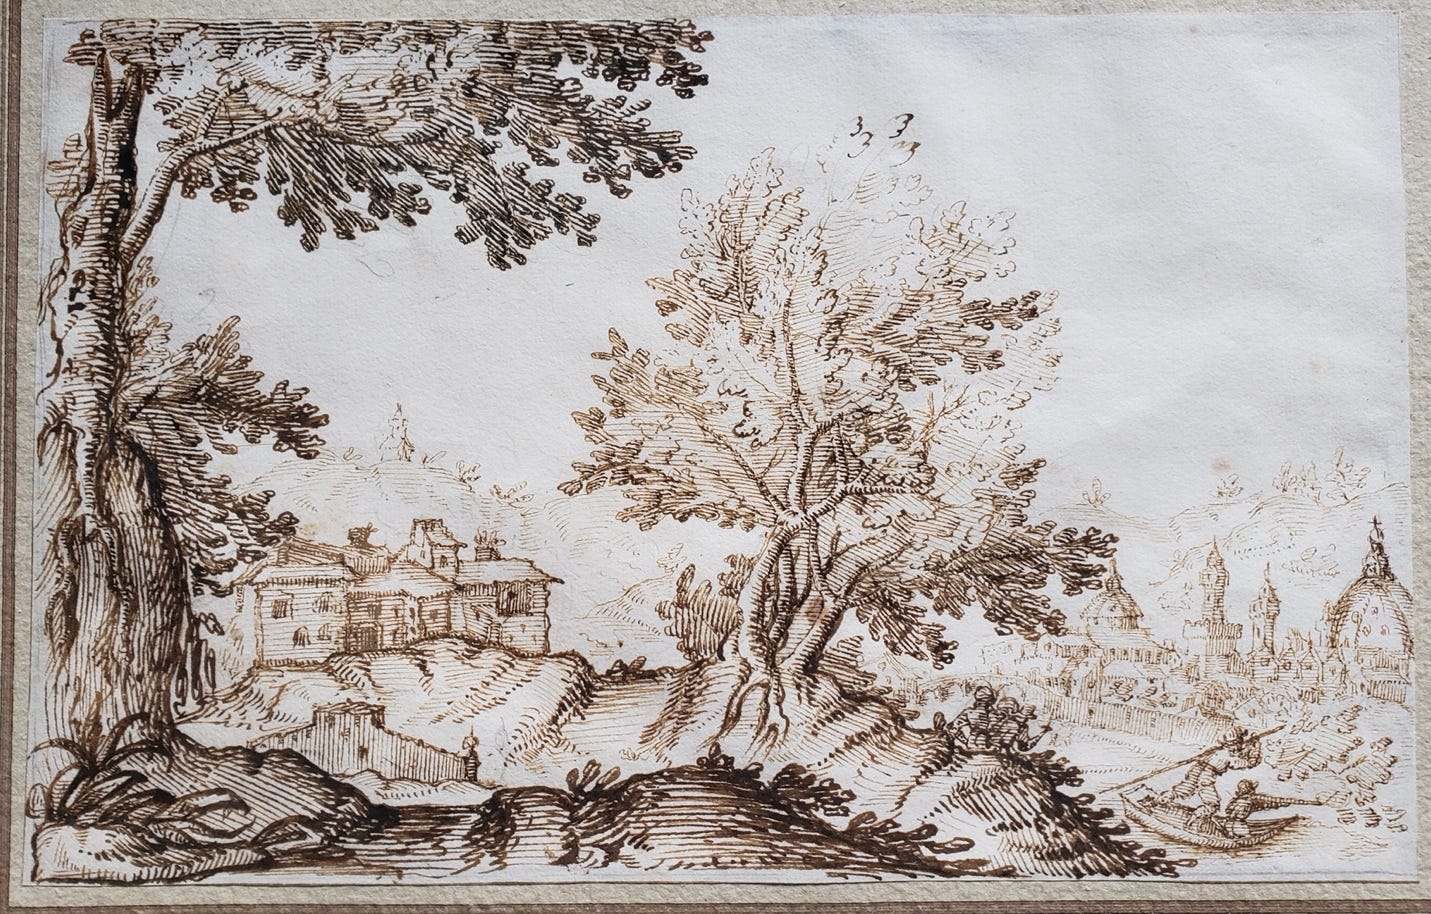 A drawing of a landscape with a house and trees

Description automatically generated